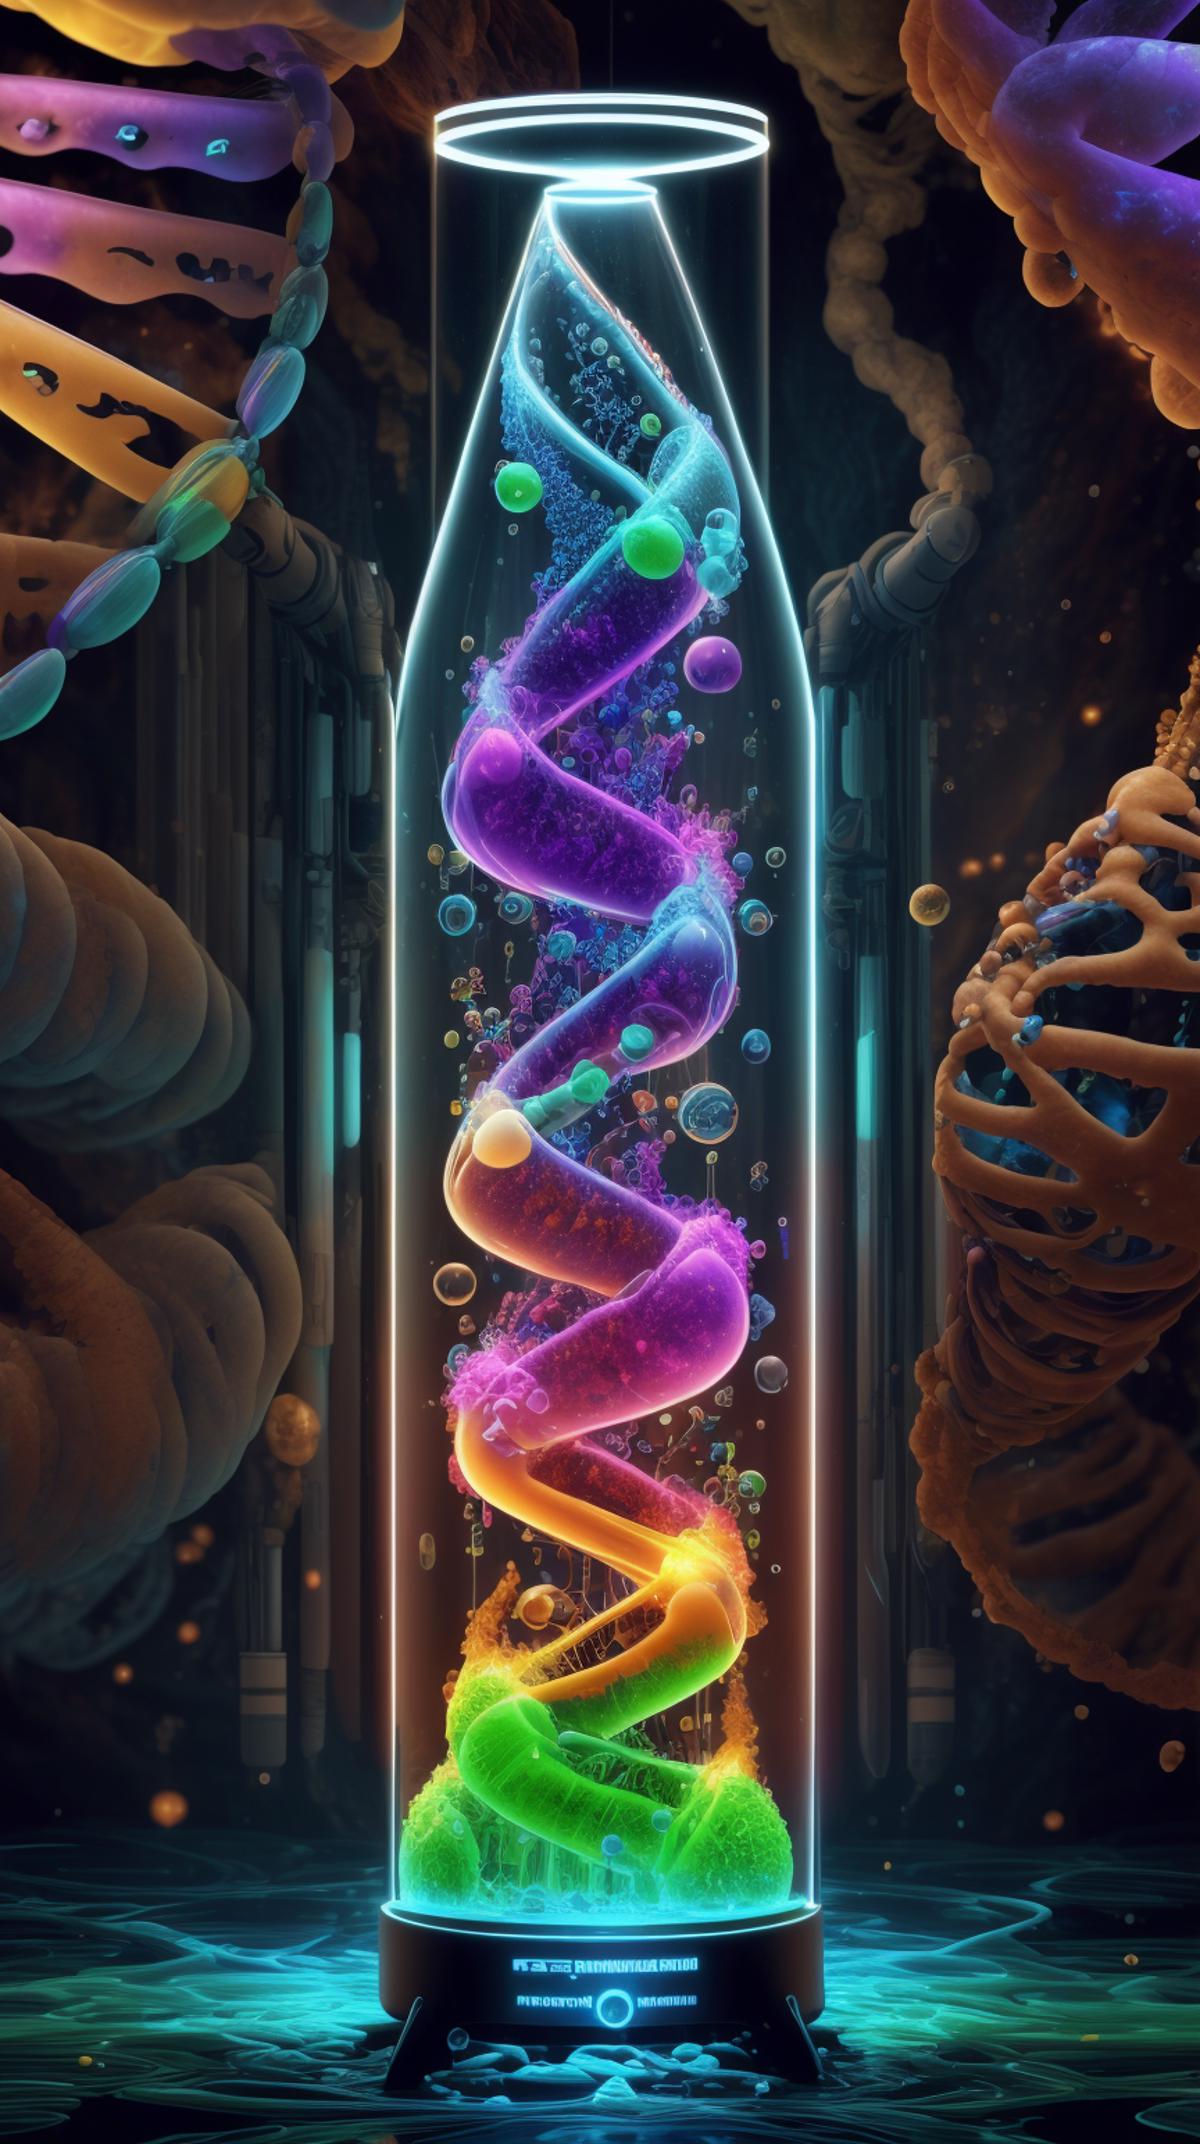 Science DNA Style - Nature's building blocks! - SD1.5 + SDXL image by mnemic